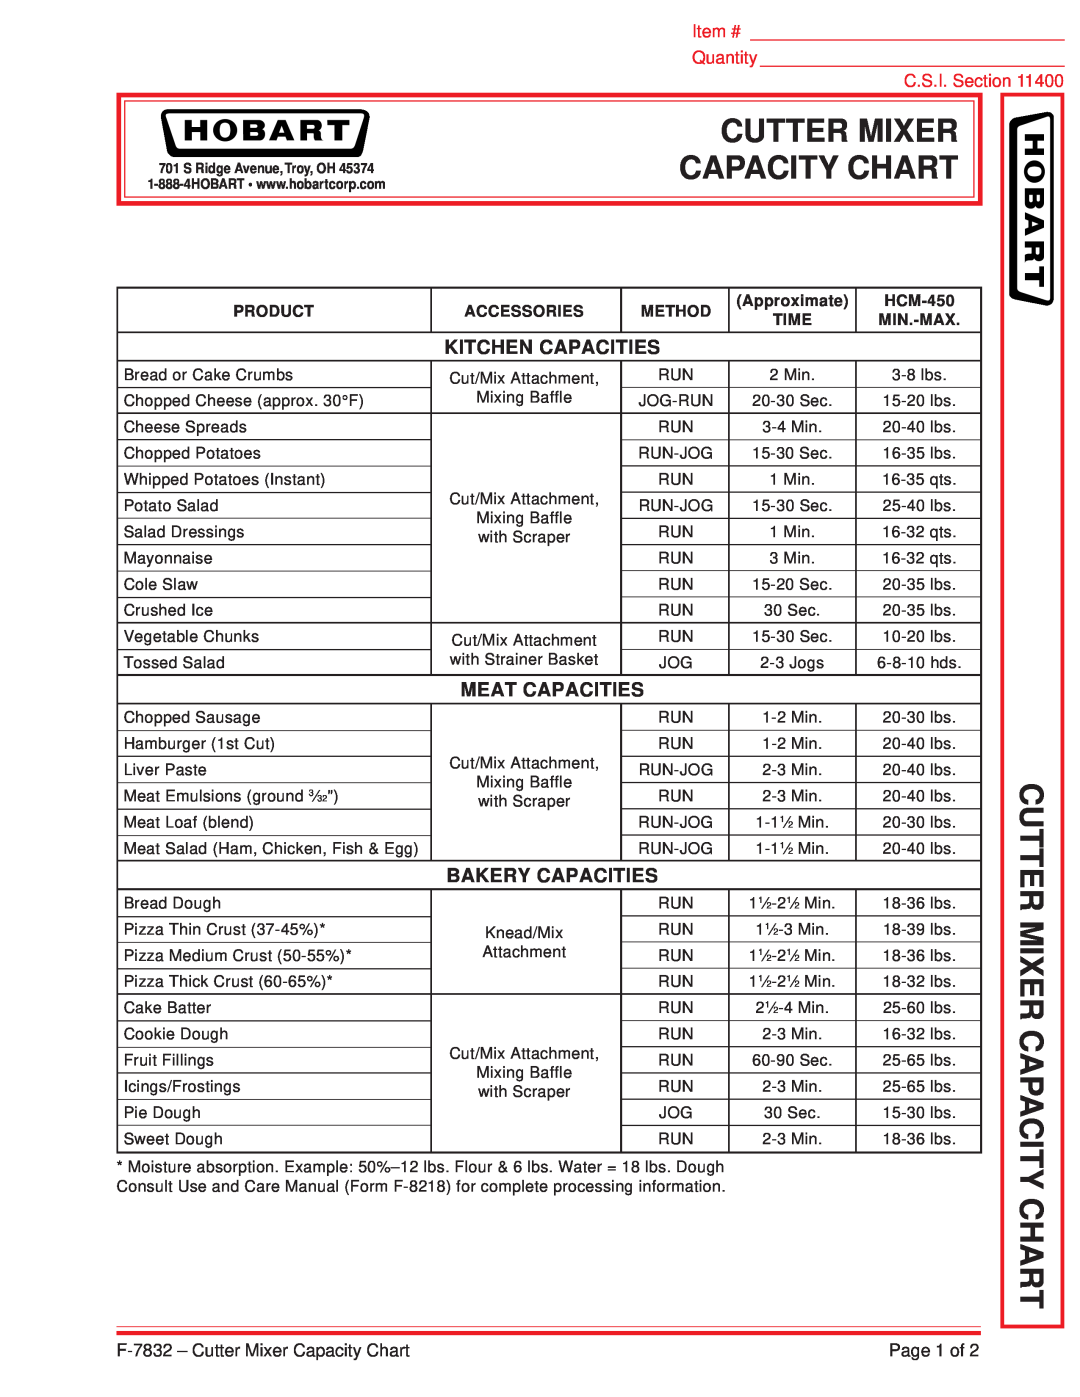 Hobart manual F-7832 - Cutter Mixer Capacity Chart, Page 1 of, Kitchen Capacities, Meat Capacities 